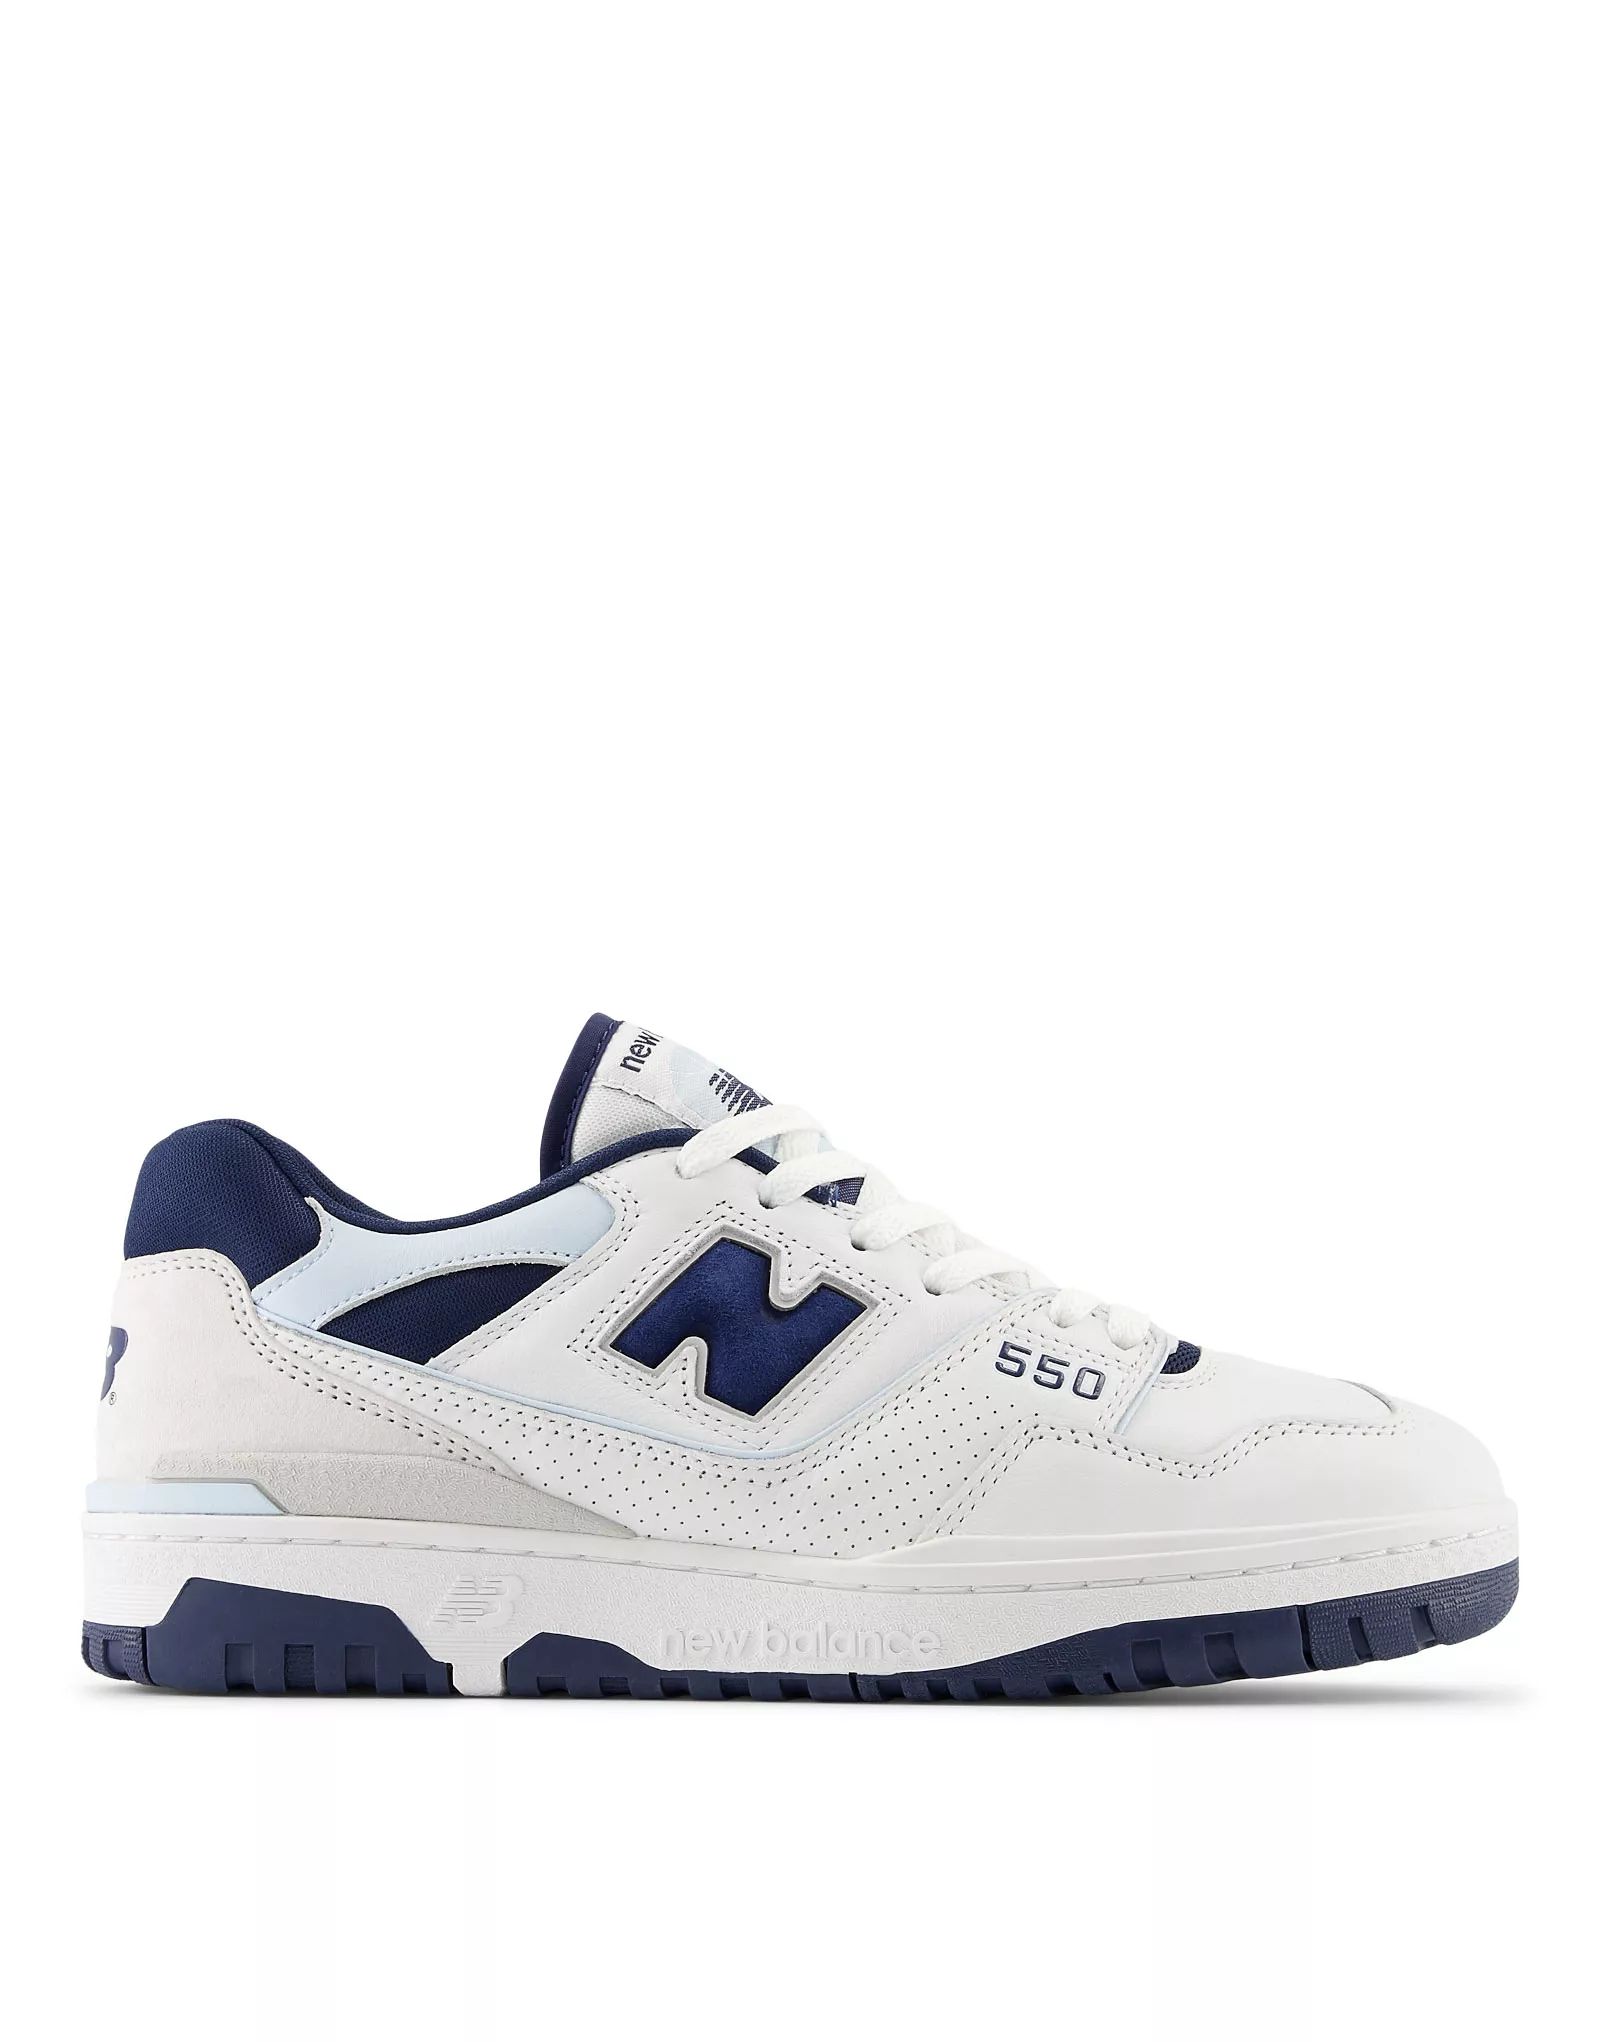 New Balance 550 sneakers in white and dark blue | ASOS | ASOS (Global)